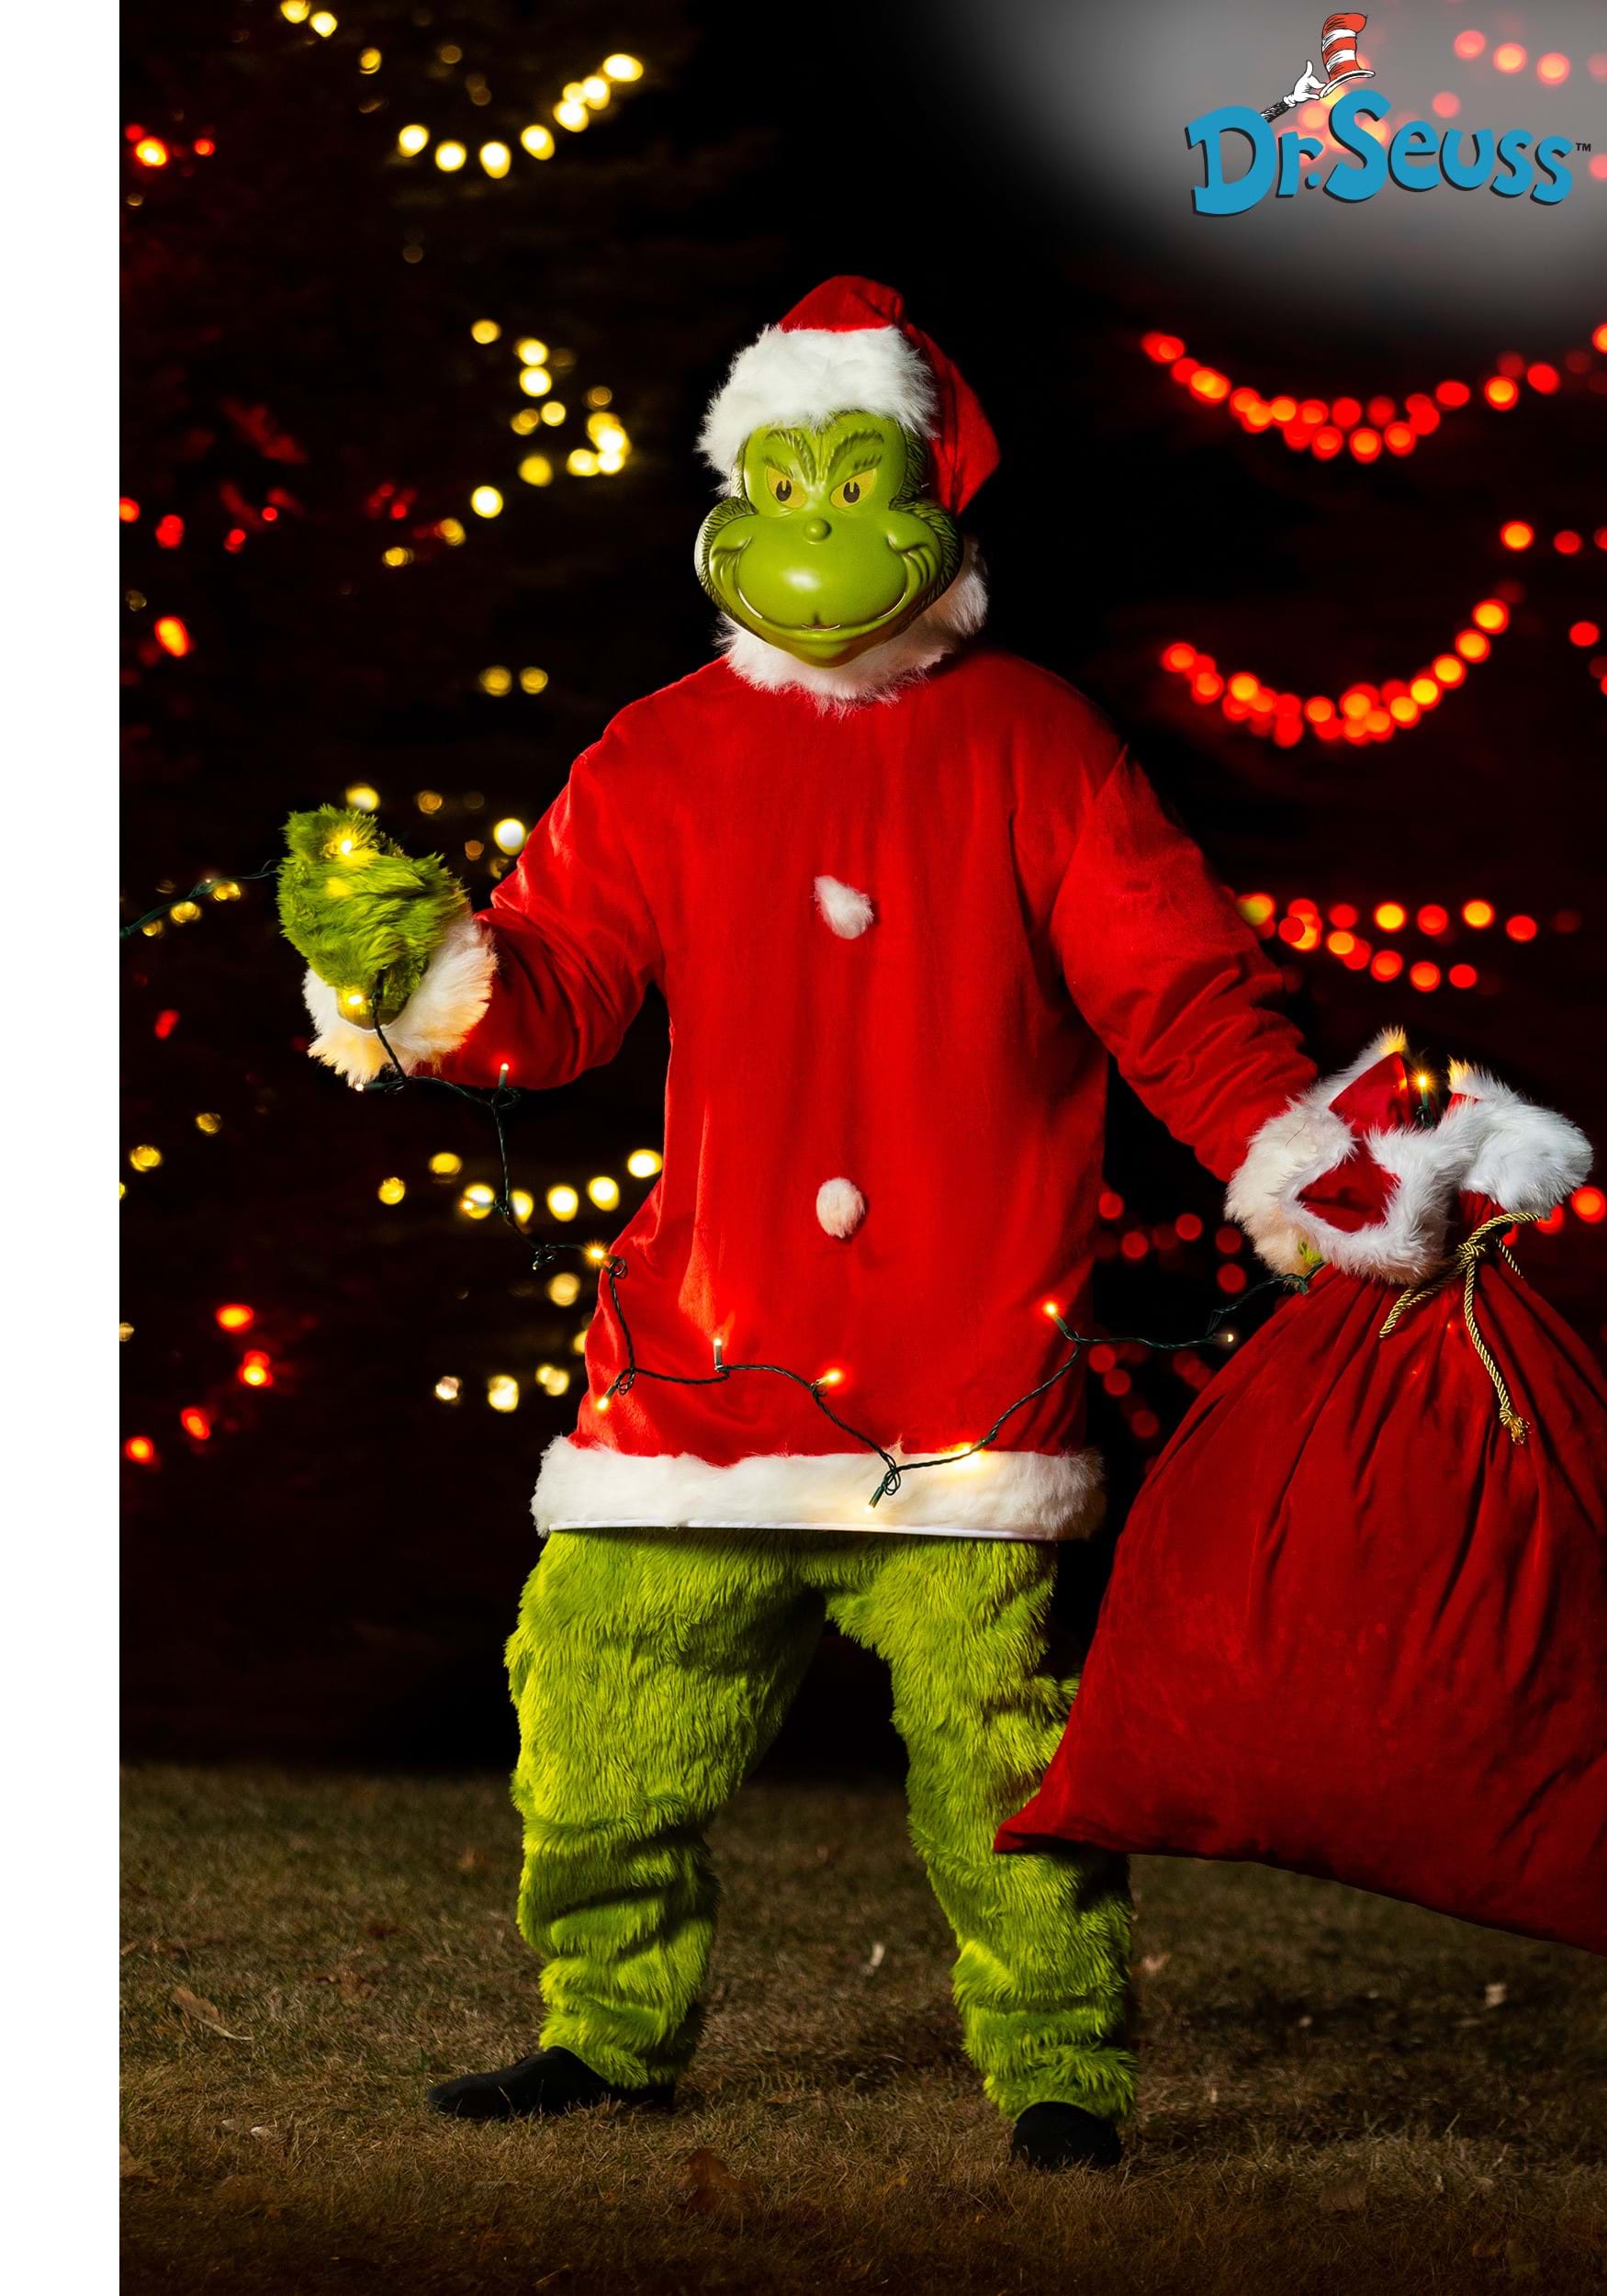 The Grinch Costume Cosplay How the Grinch Stole Christmas Santa Fancy Outfits 